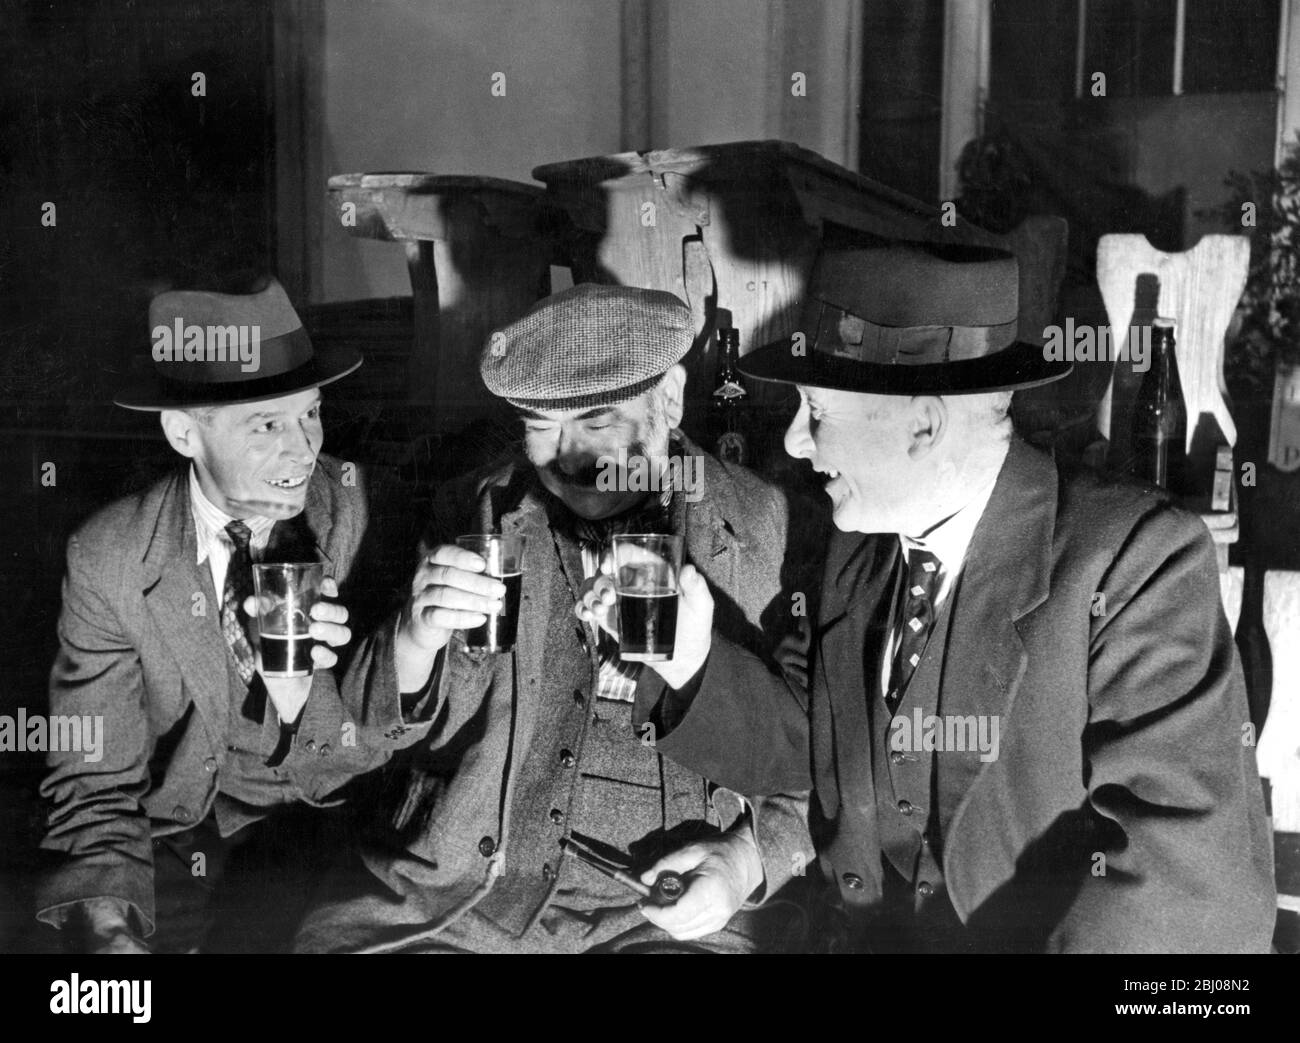 Three men stitting down in a pub drinking for Harvest Horkey tradition at Bury St Edmunds - c.1938 - Stock Photo